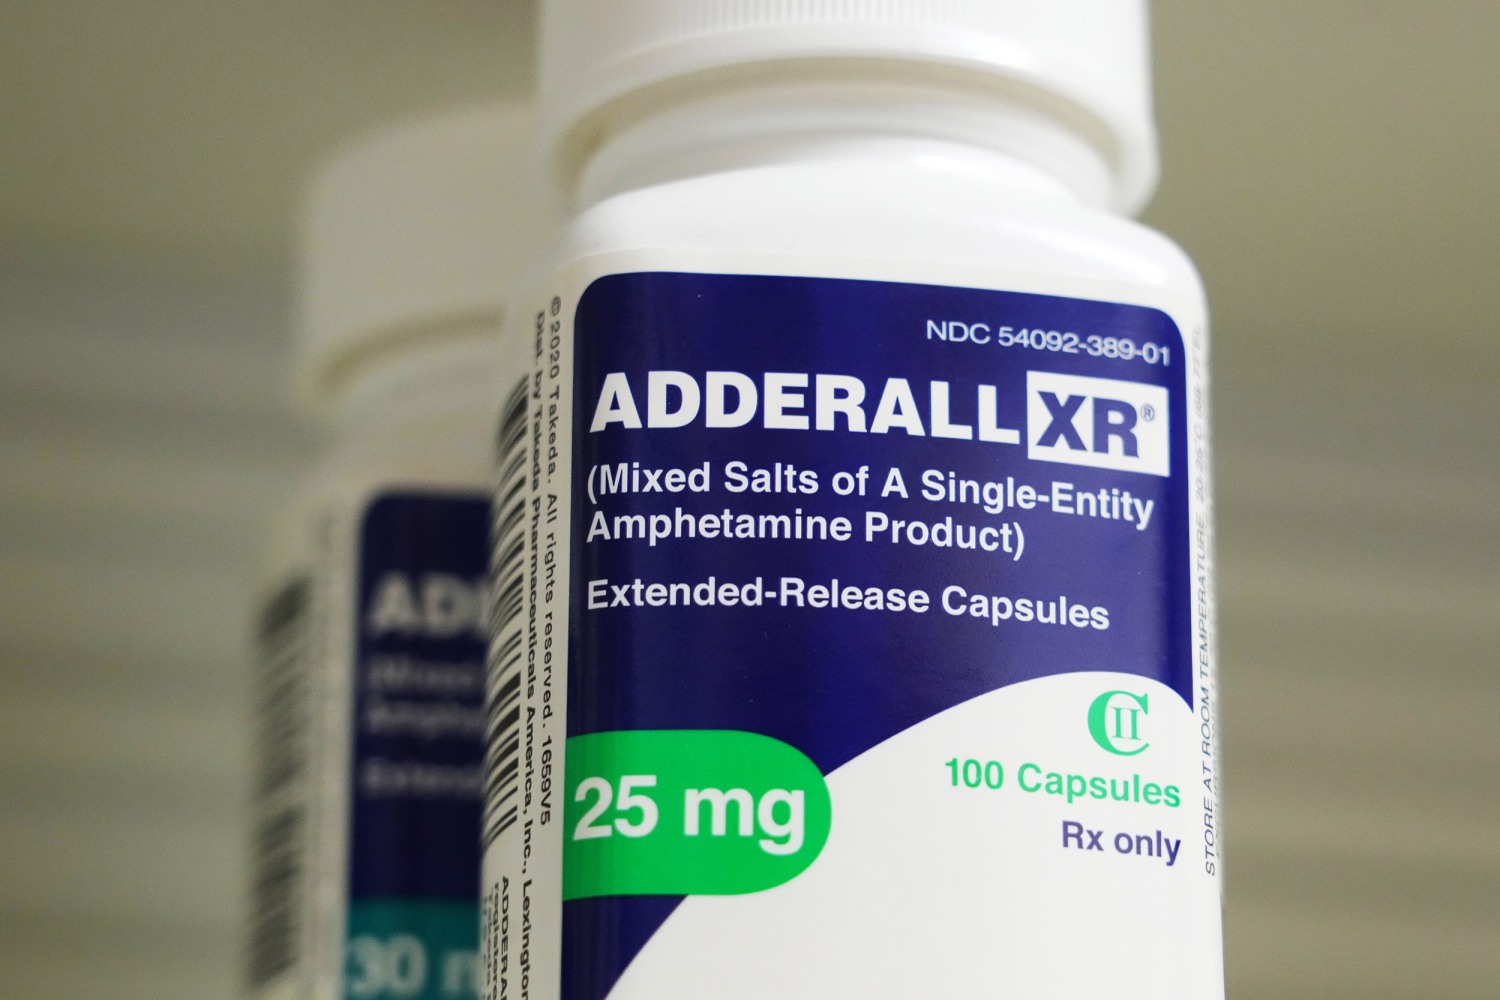 Modafinil Vs Adderall: Which Enhances Cognitive Performance?